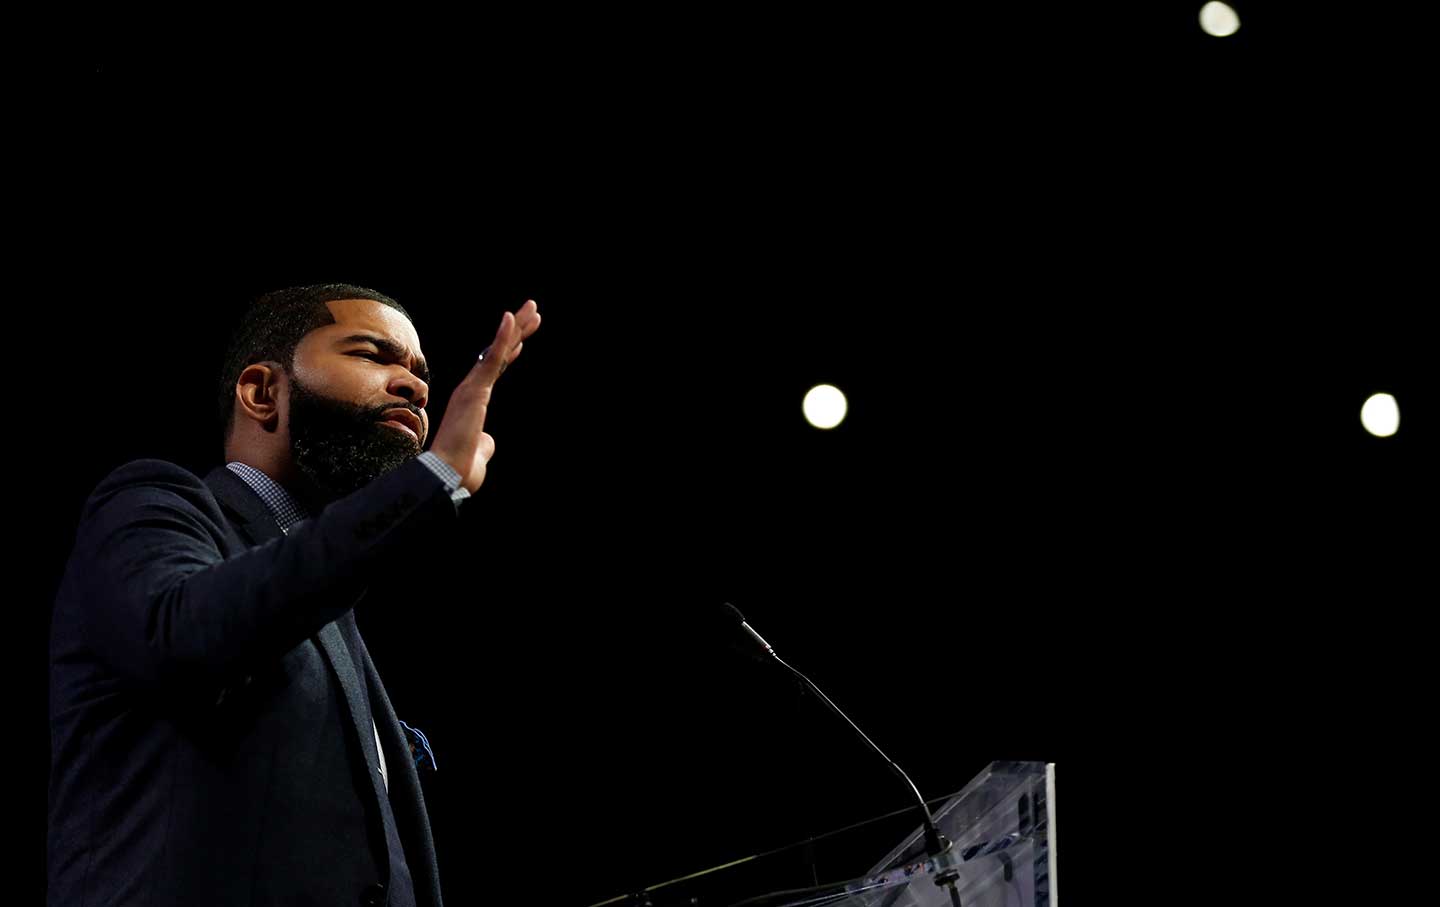 Chokwe Antar Lumumba: Being a Radical Means Getting to the Root Causes of Injustice